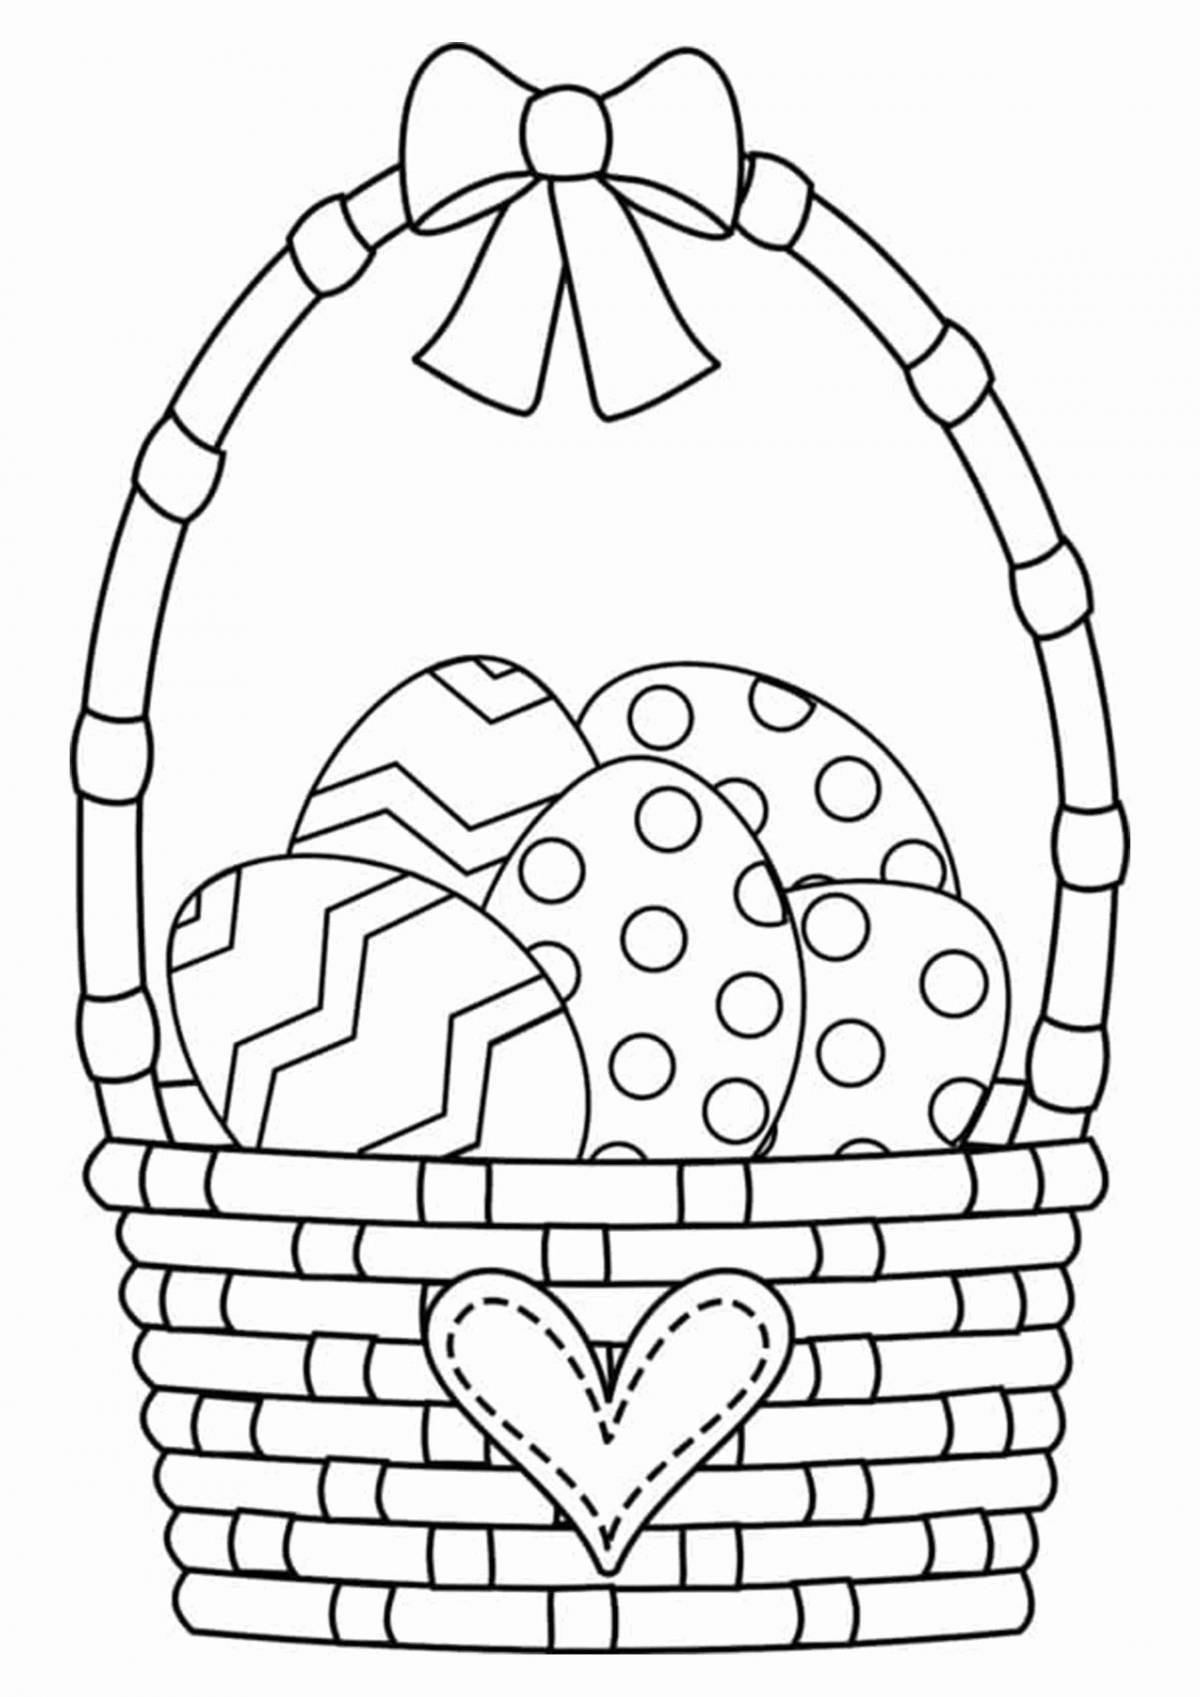 Colored basket with mushrooms coloring book